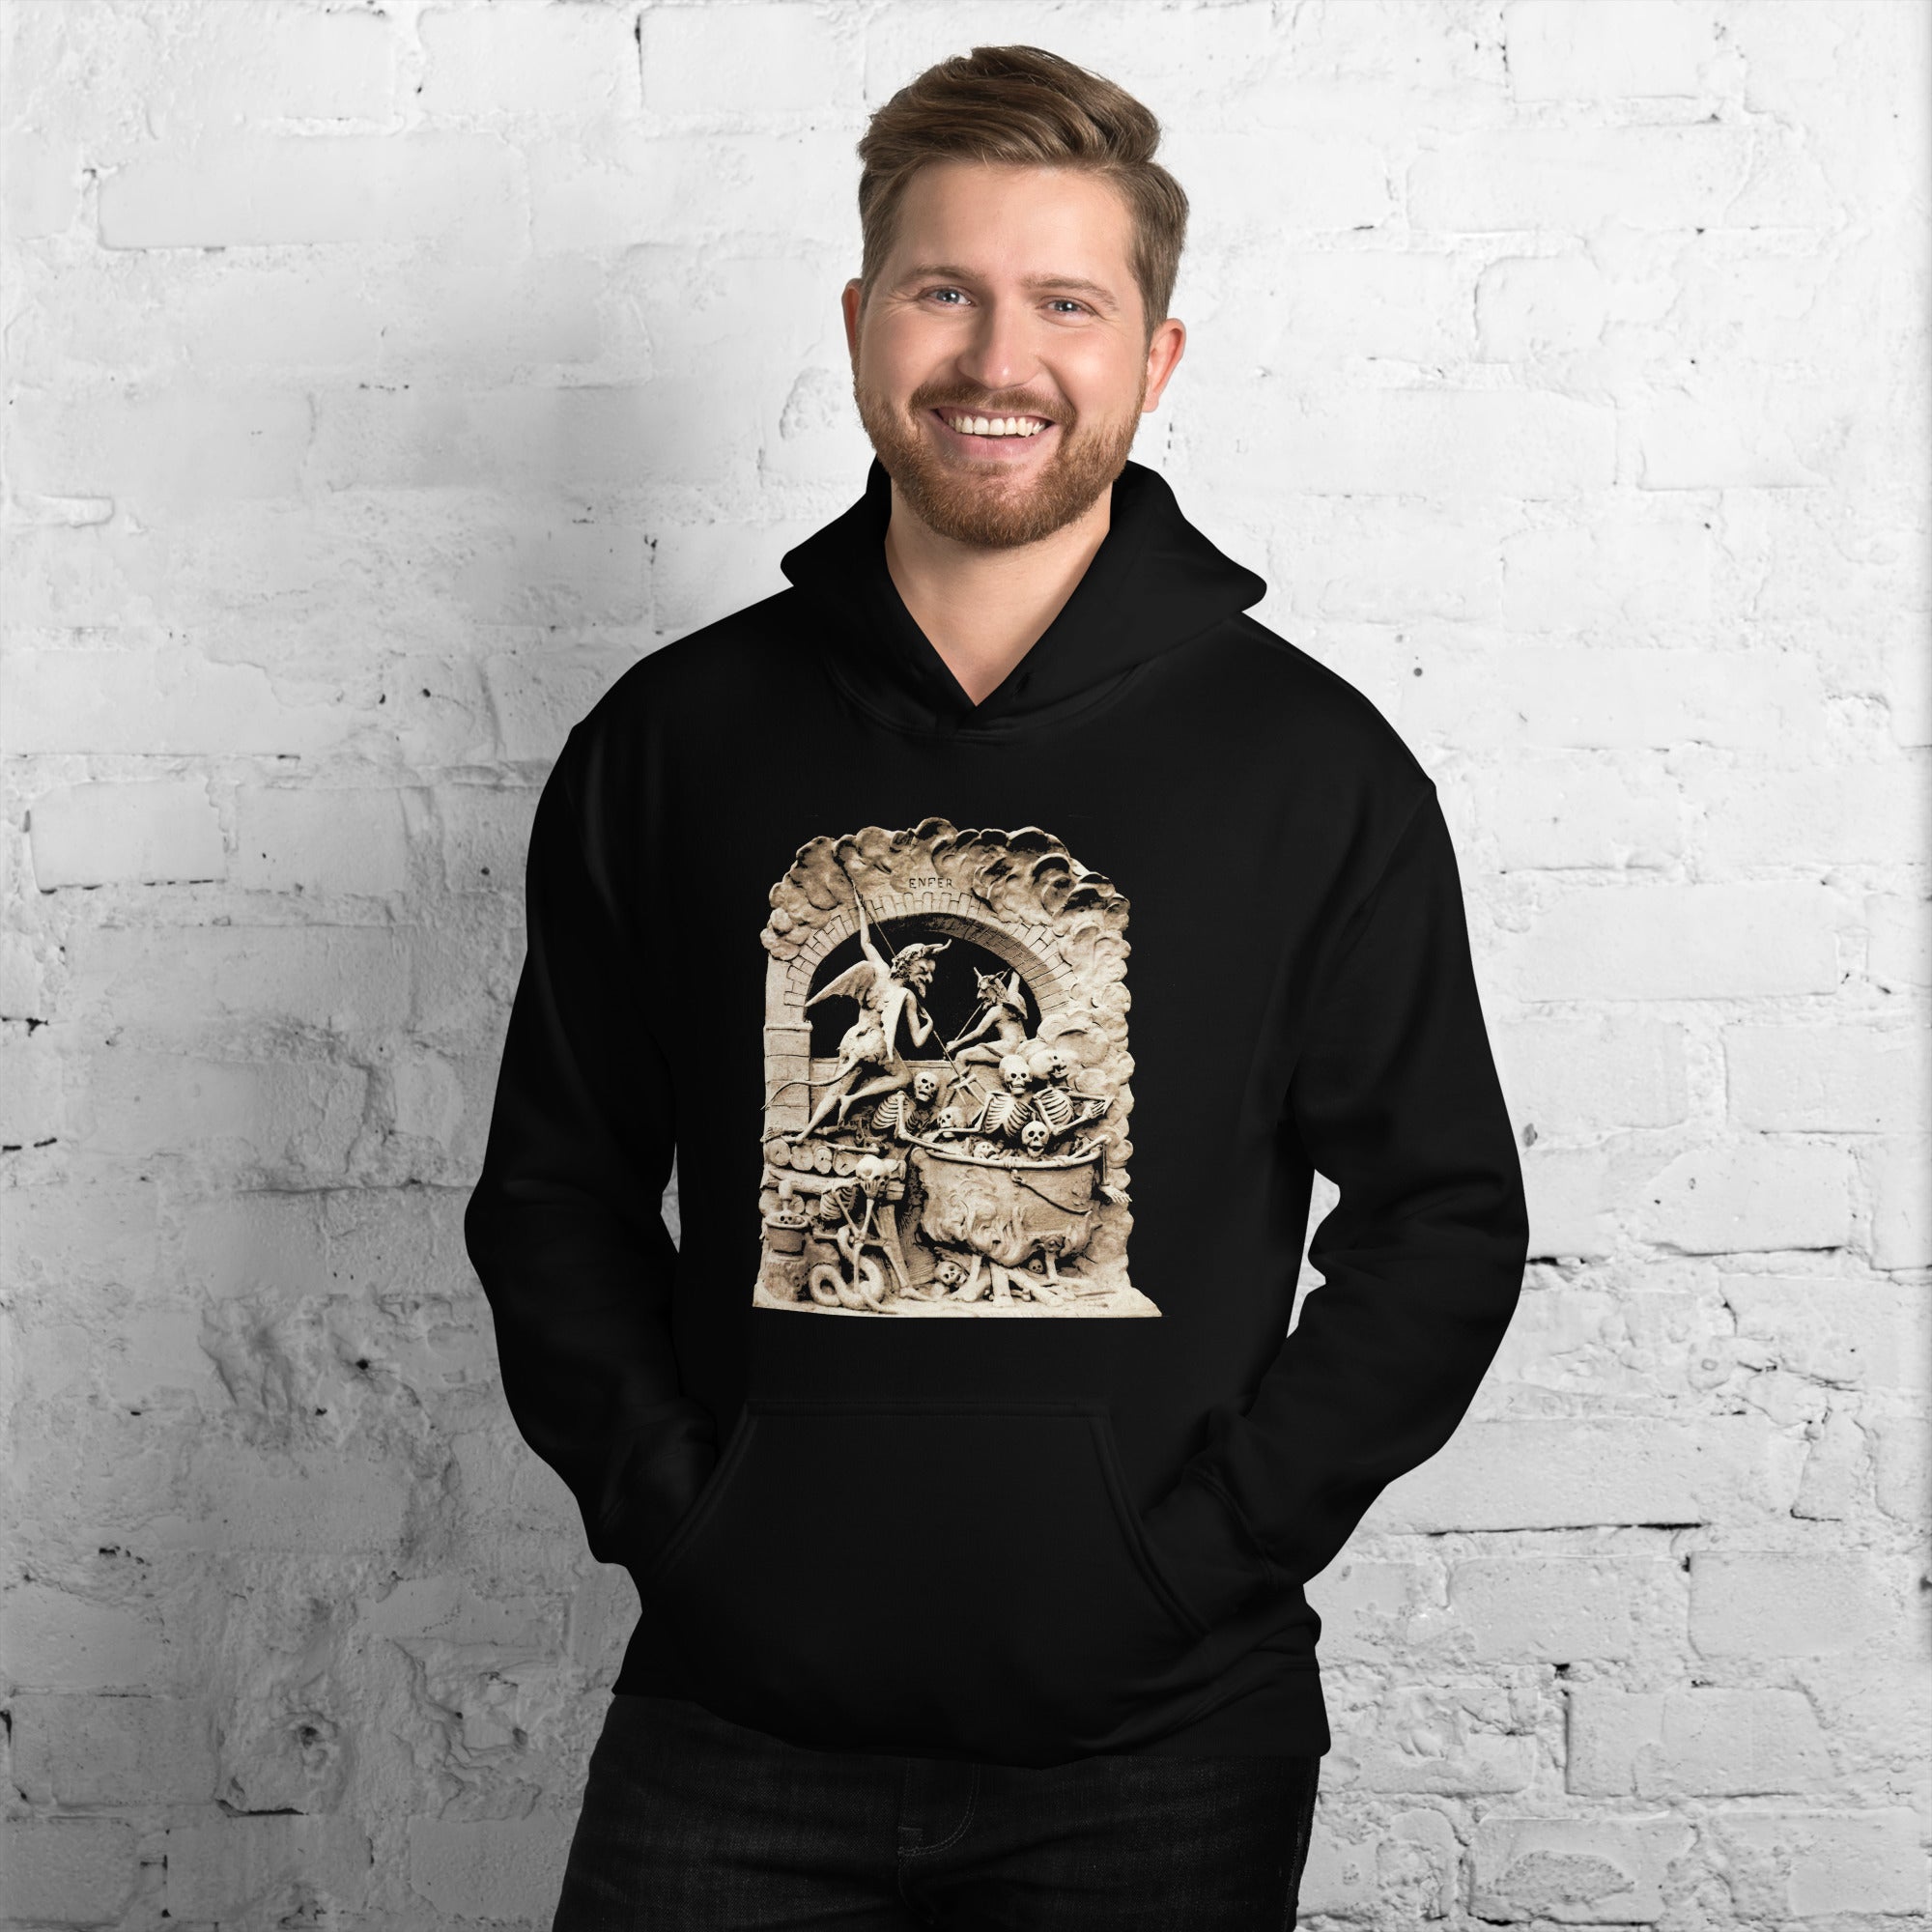 Les Diableries The Pits of Hell and the Devil Unisex Hoodie Sweatshirt - Edge of Life Designs